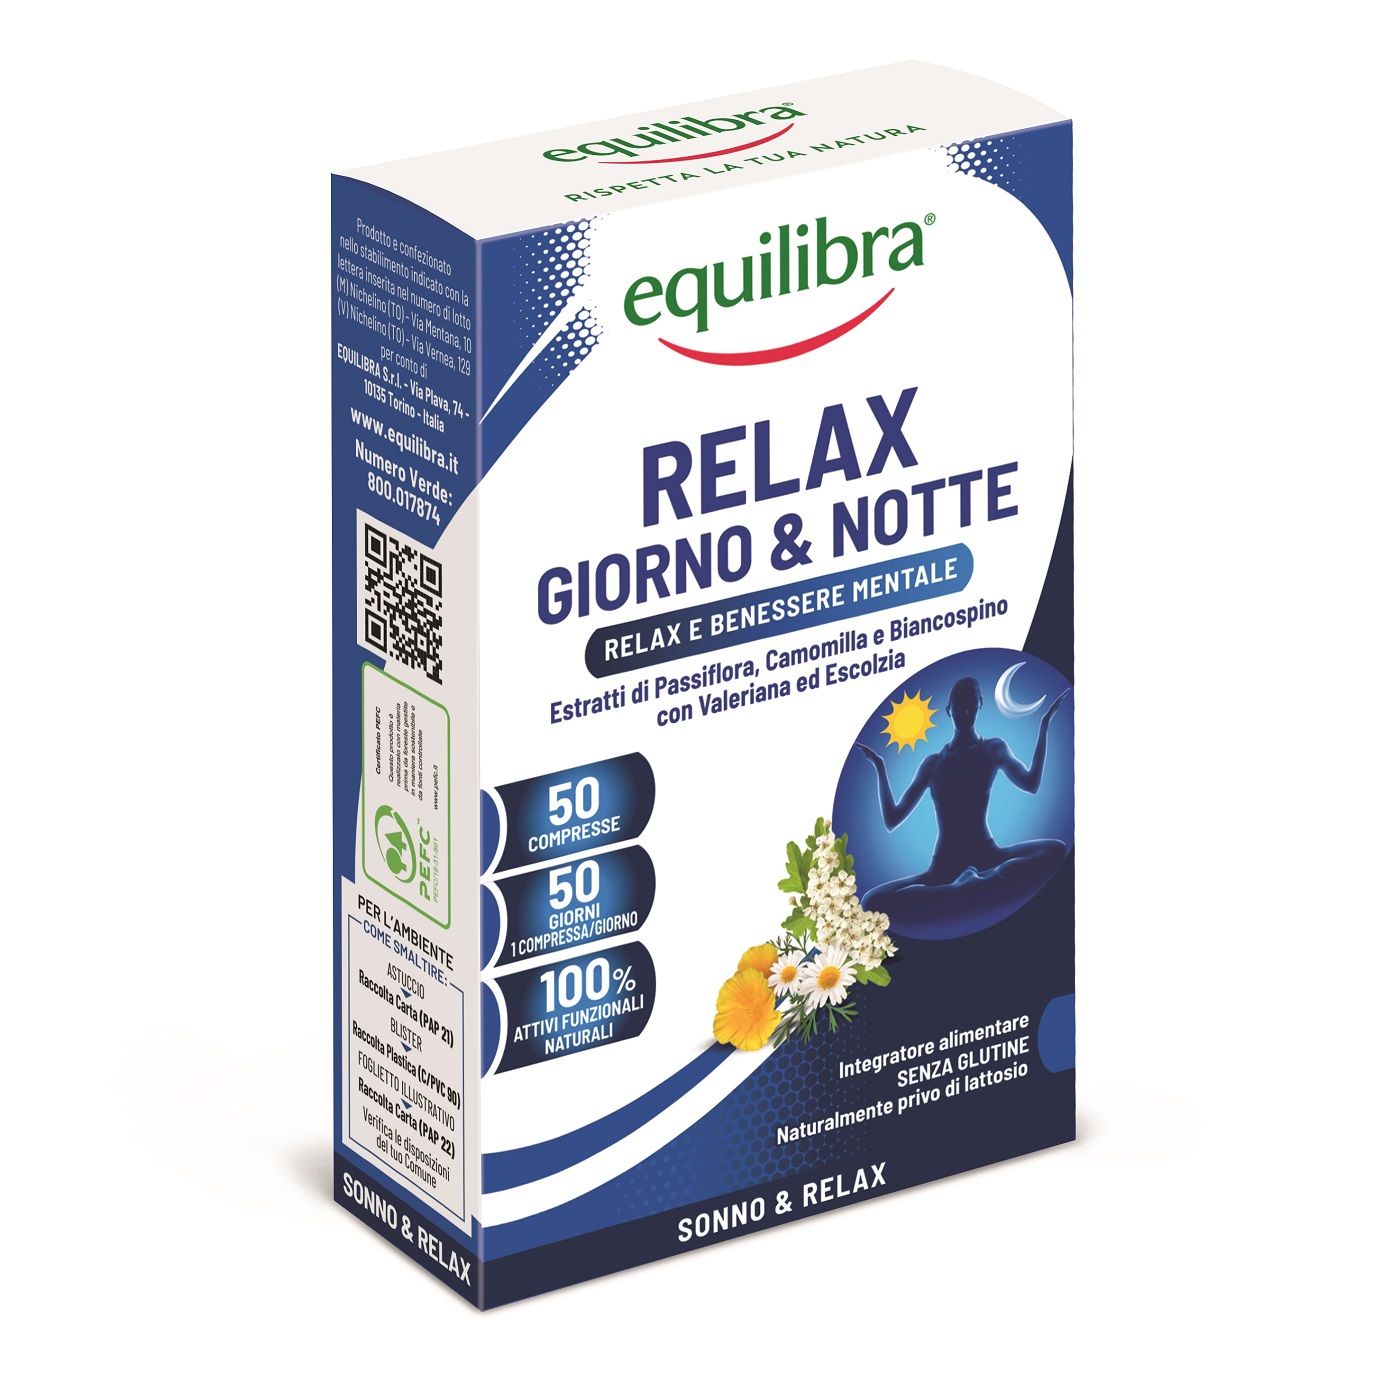 Image of Relax Giorno & Notte Equilibra 50 Compresse